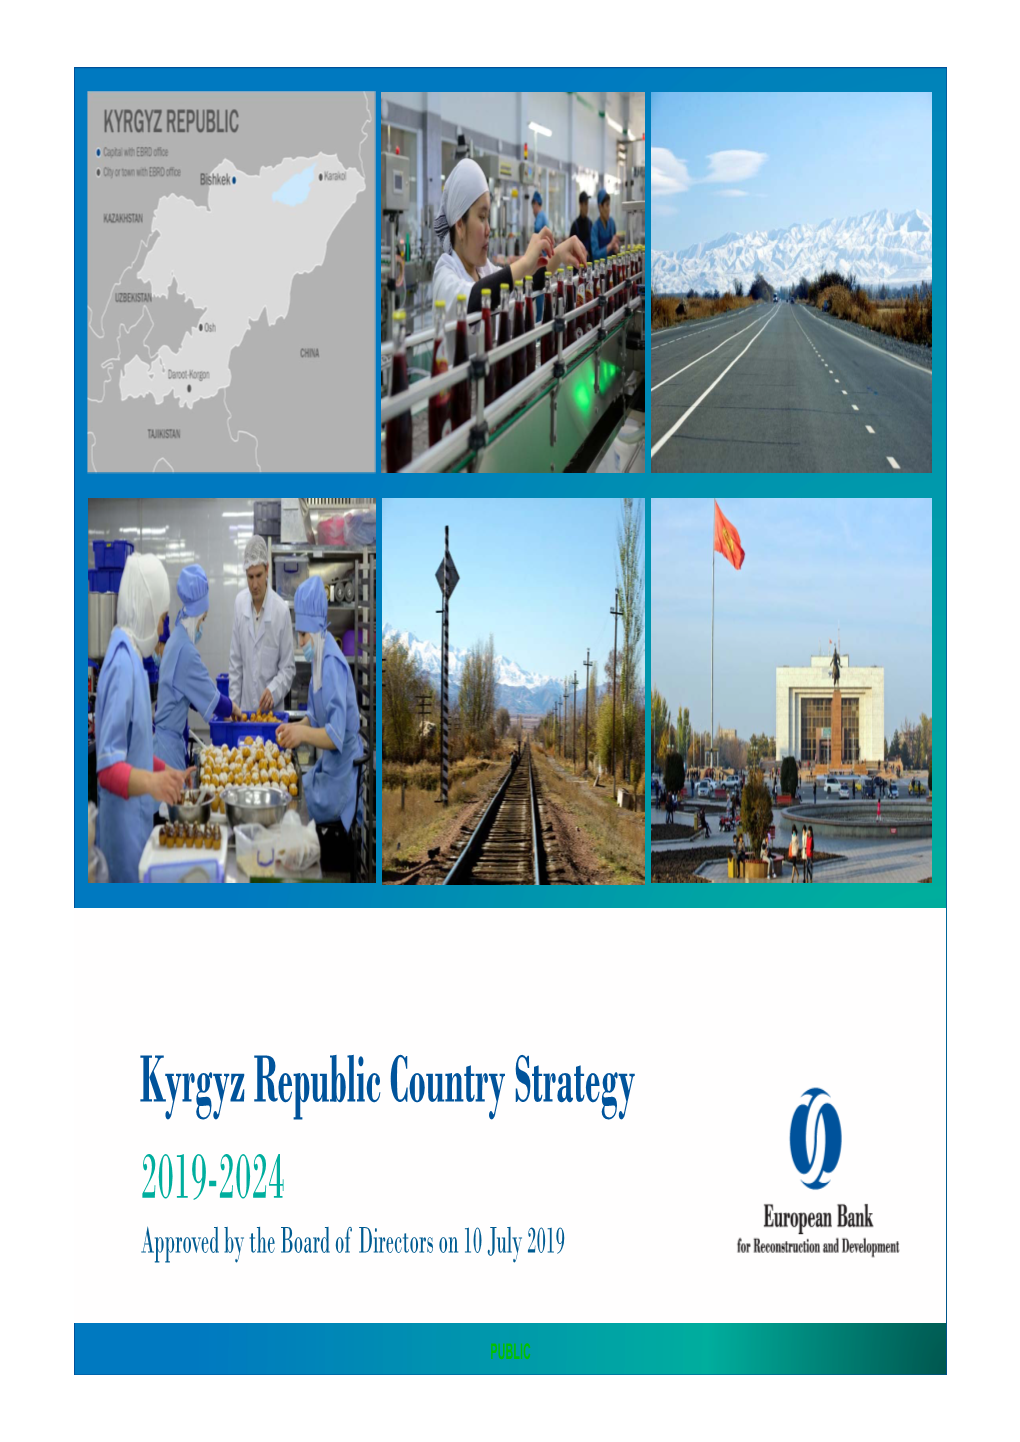 Kyrgyz Republic Country Strategy 2019-2024 Approved by the Board of Directors on 10 July 2019